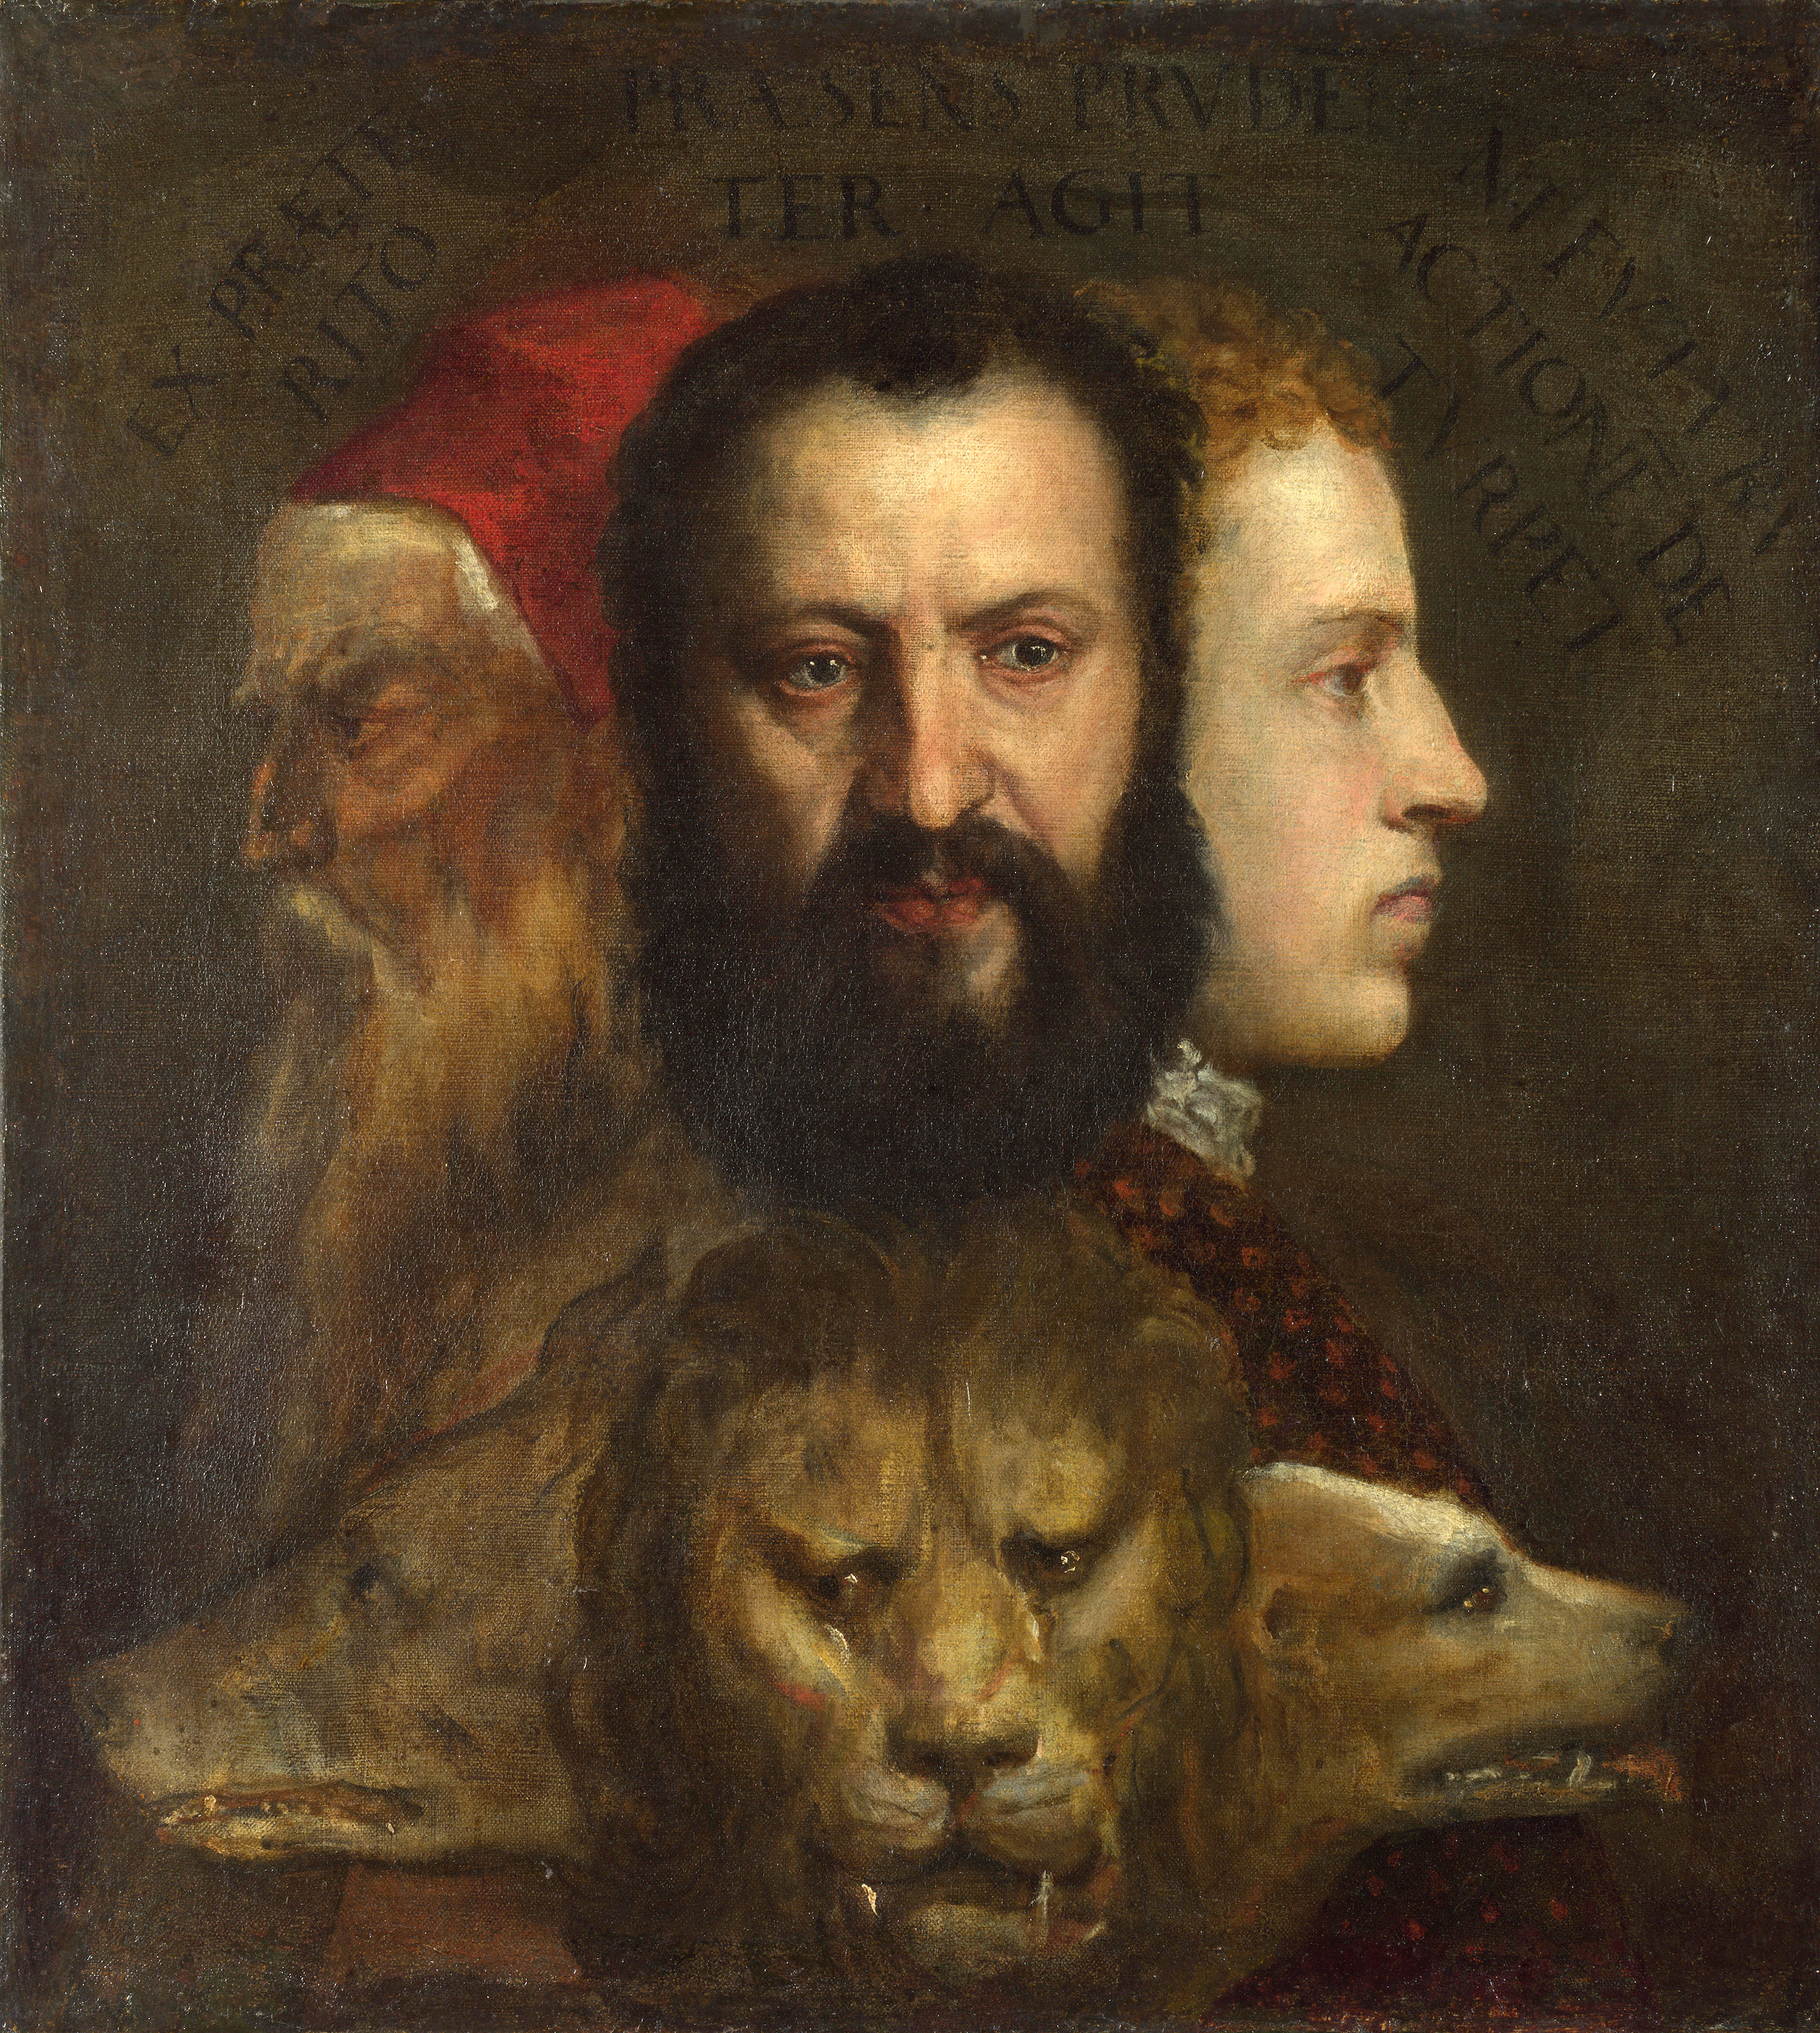 Allegory of (Time Governed by) Prudence by  Titian - c.1565 - 76 x 69 cm National Gallery